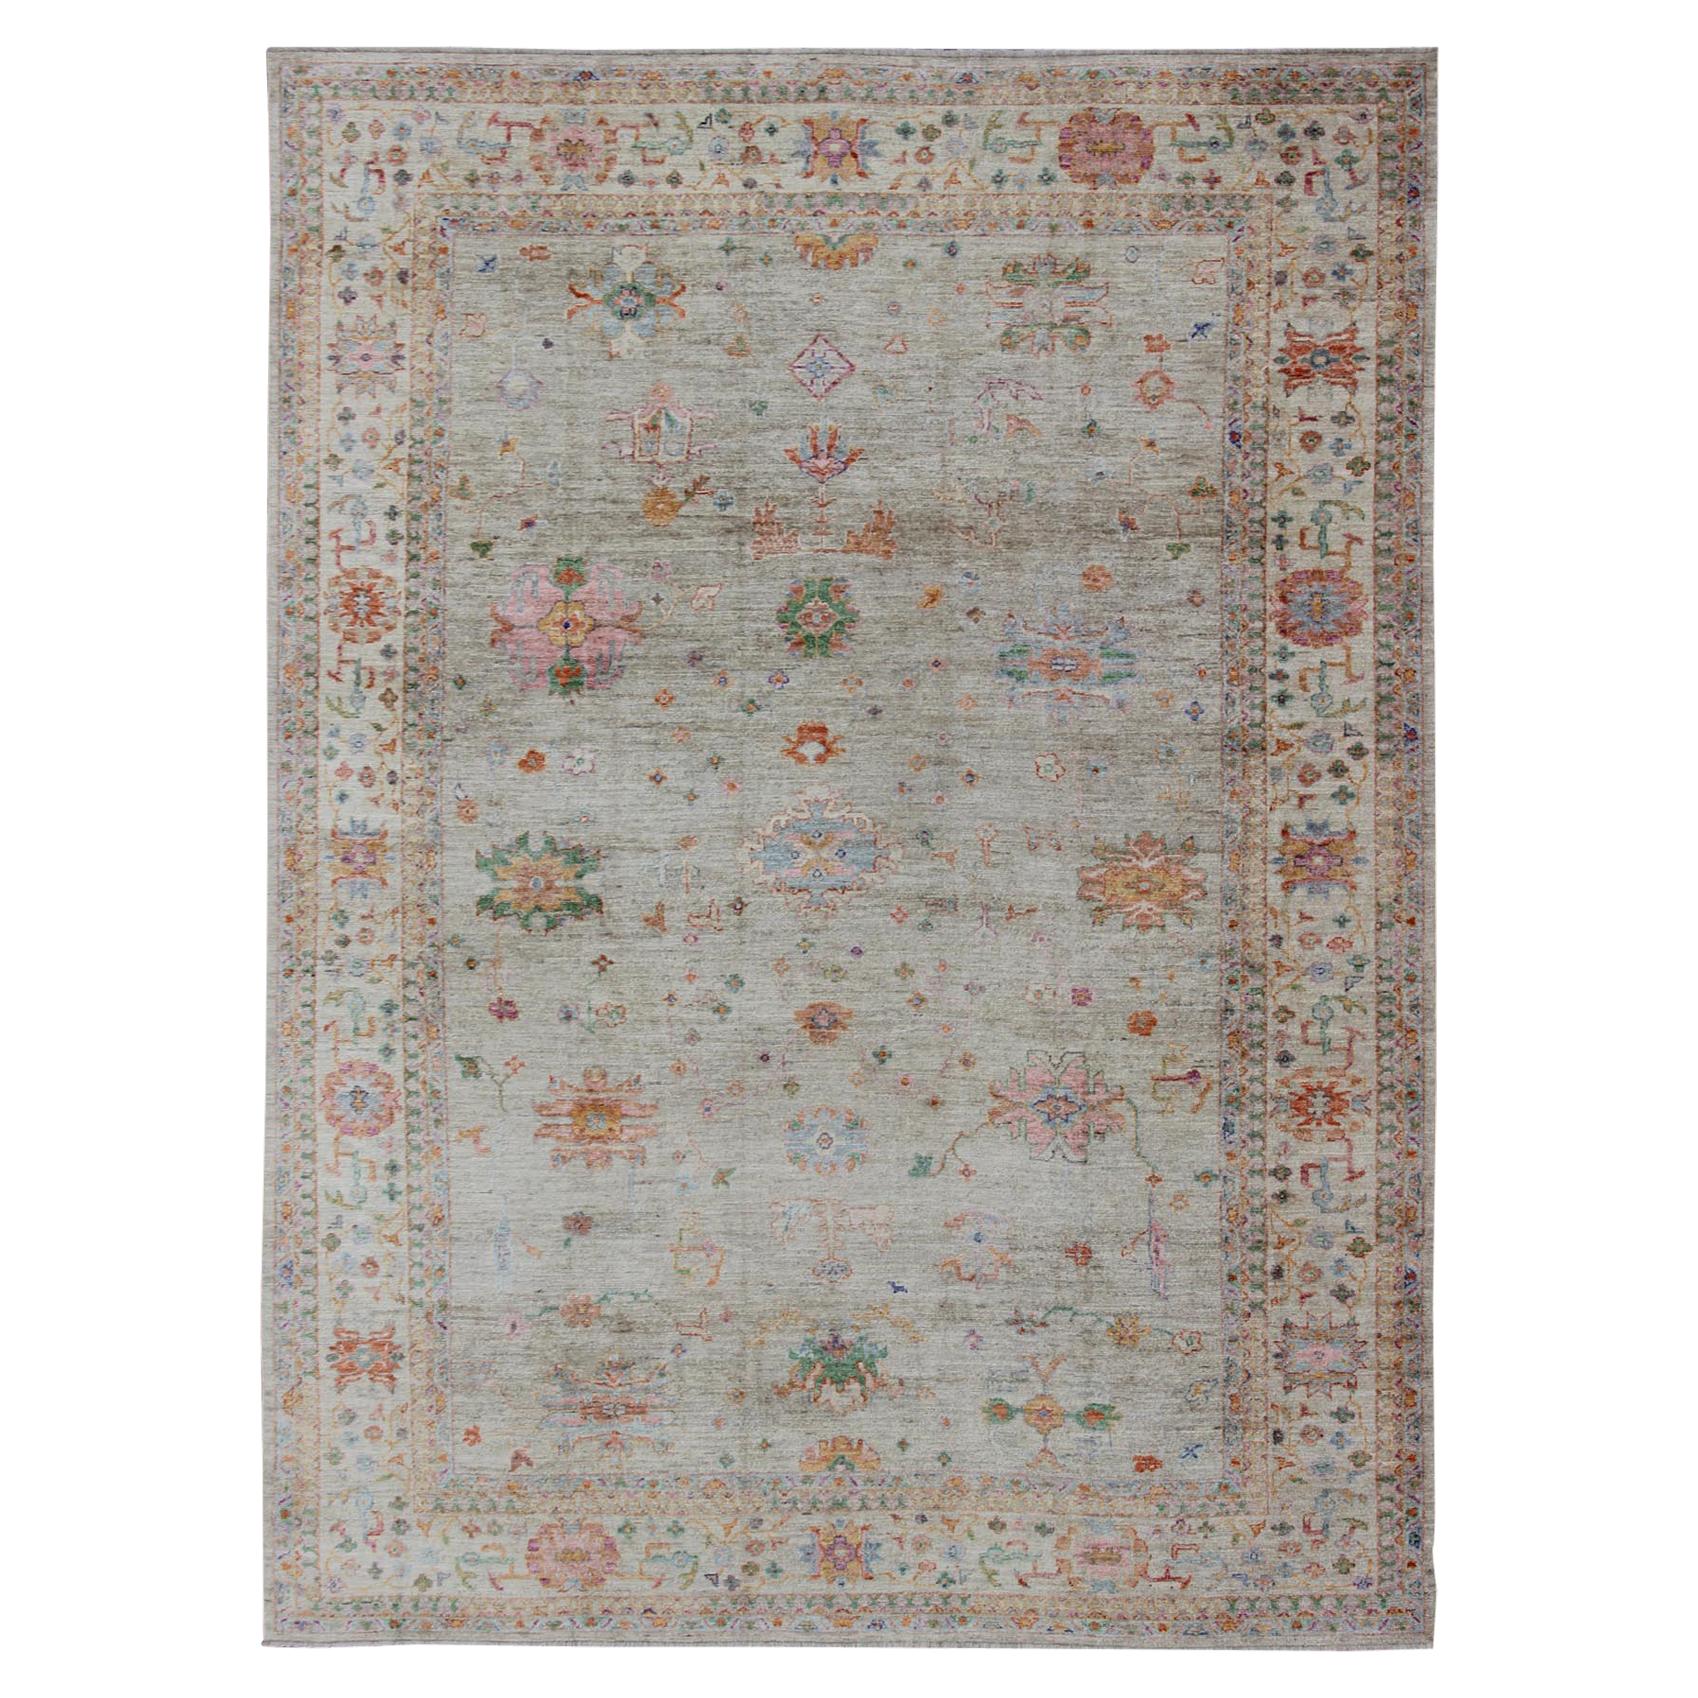 Colorful Angora Turkish Oushak Large Rug with All-Over Design